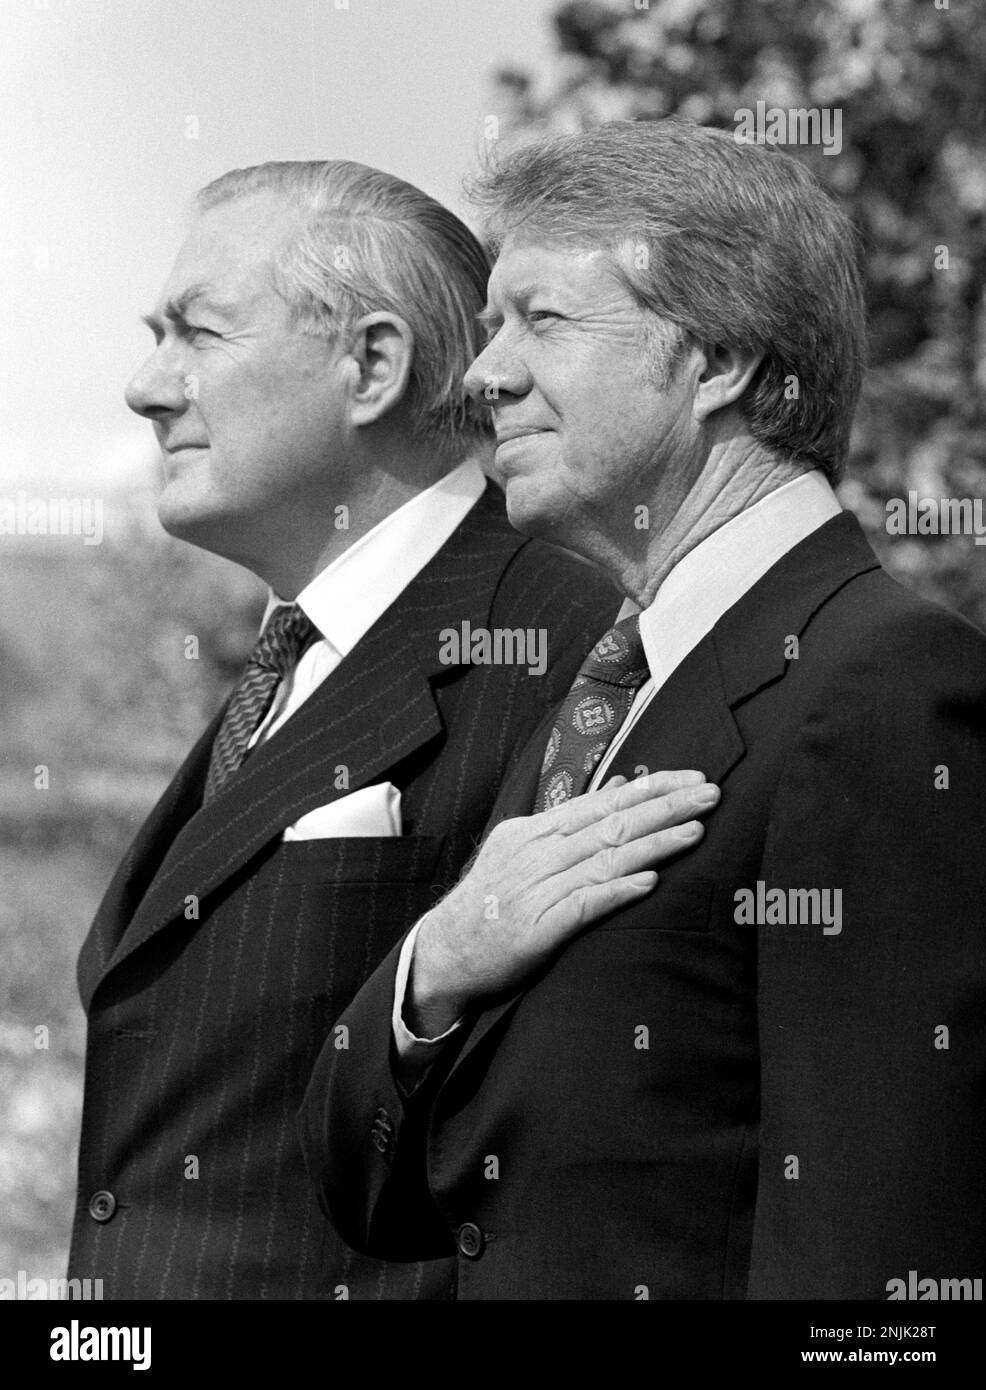 United States President Jimmy Carter, right, and Prime Minister James Callaghan of the United Kingdom of Great Briitain and Northern Ireland, left, on the South Lawn of the White House in Washington, DC during the Official Arrival ceremony on March 10, 1977Credit: Benjamin E. 'Gene' Forte/CNP/Sipa USA Credit: Sipa USA/Alamy Live News Stock Photo